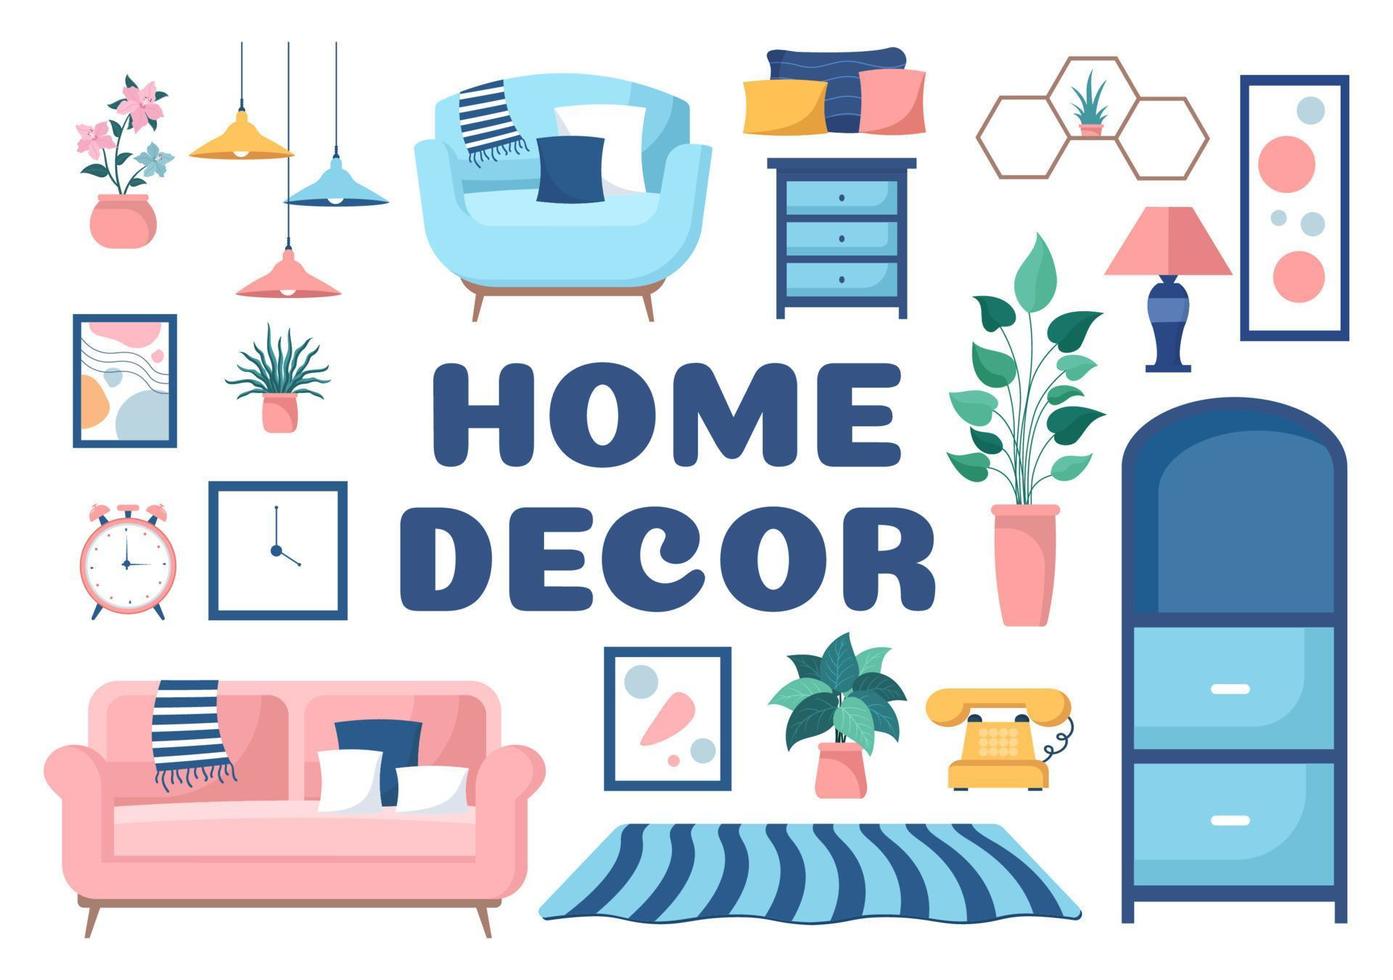 Home Decor Template Hand Drawn Cartoon Illustration The set of Furniture and Living Room Interior in Flat Style Design vector